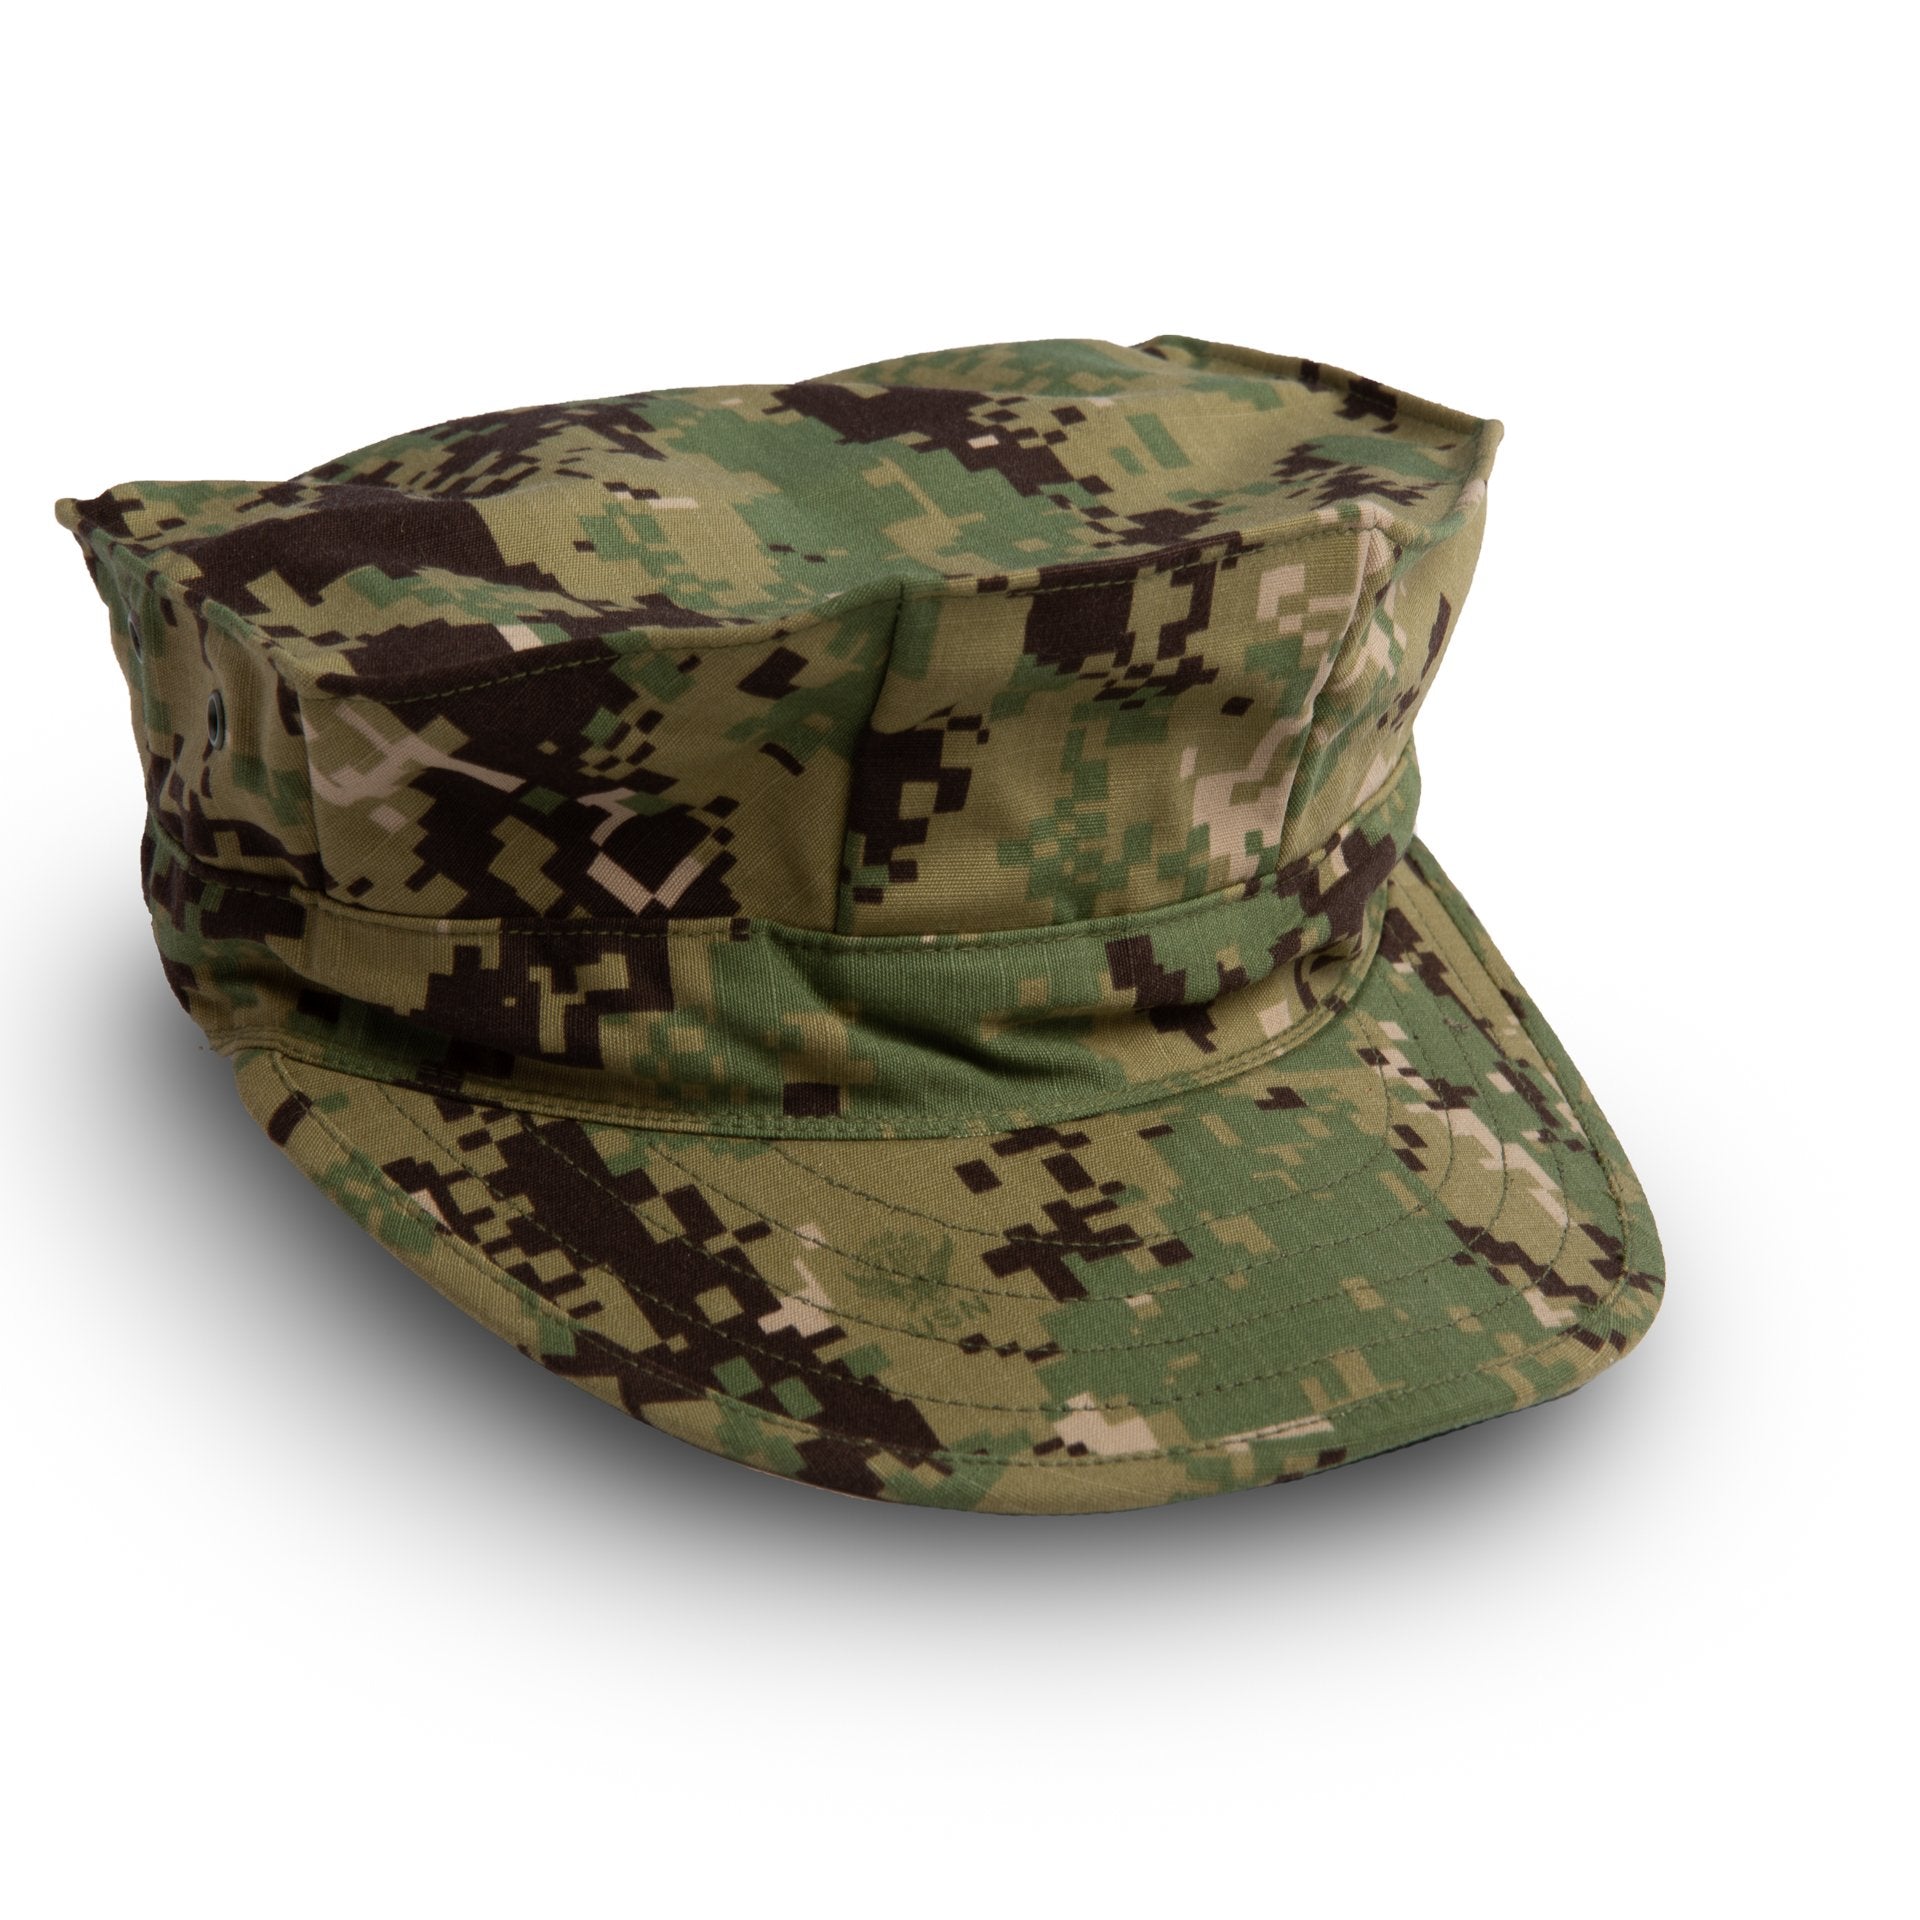 Casque type militaire US camouflage Woodland